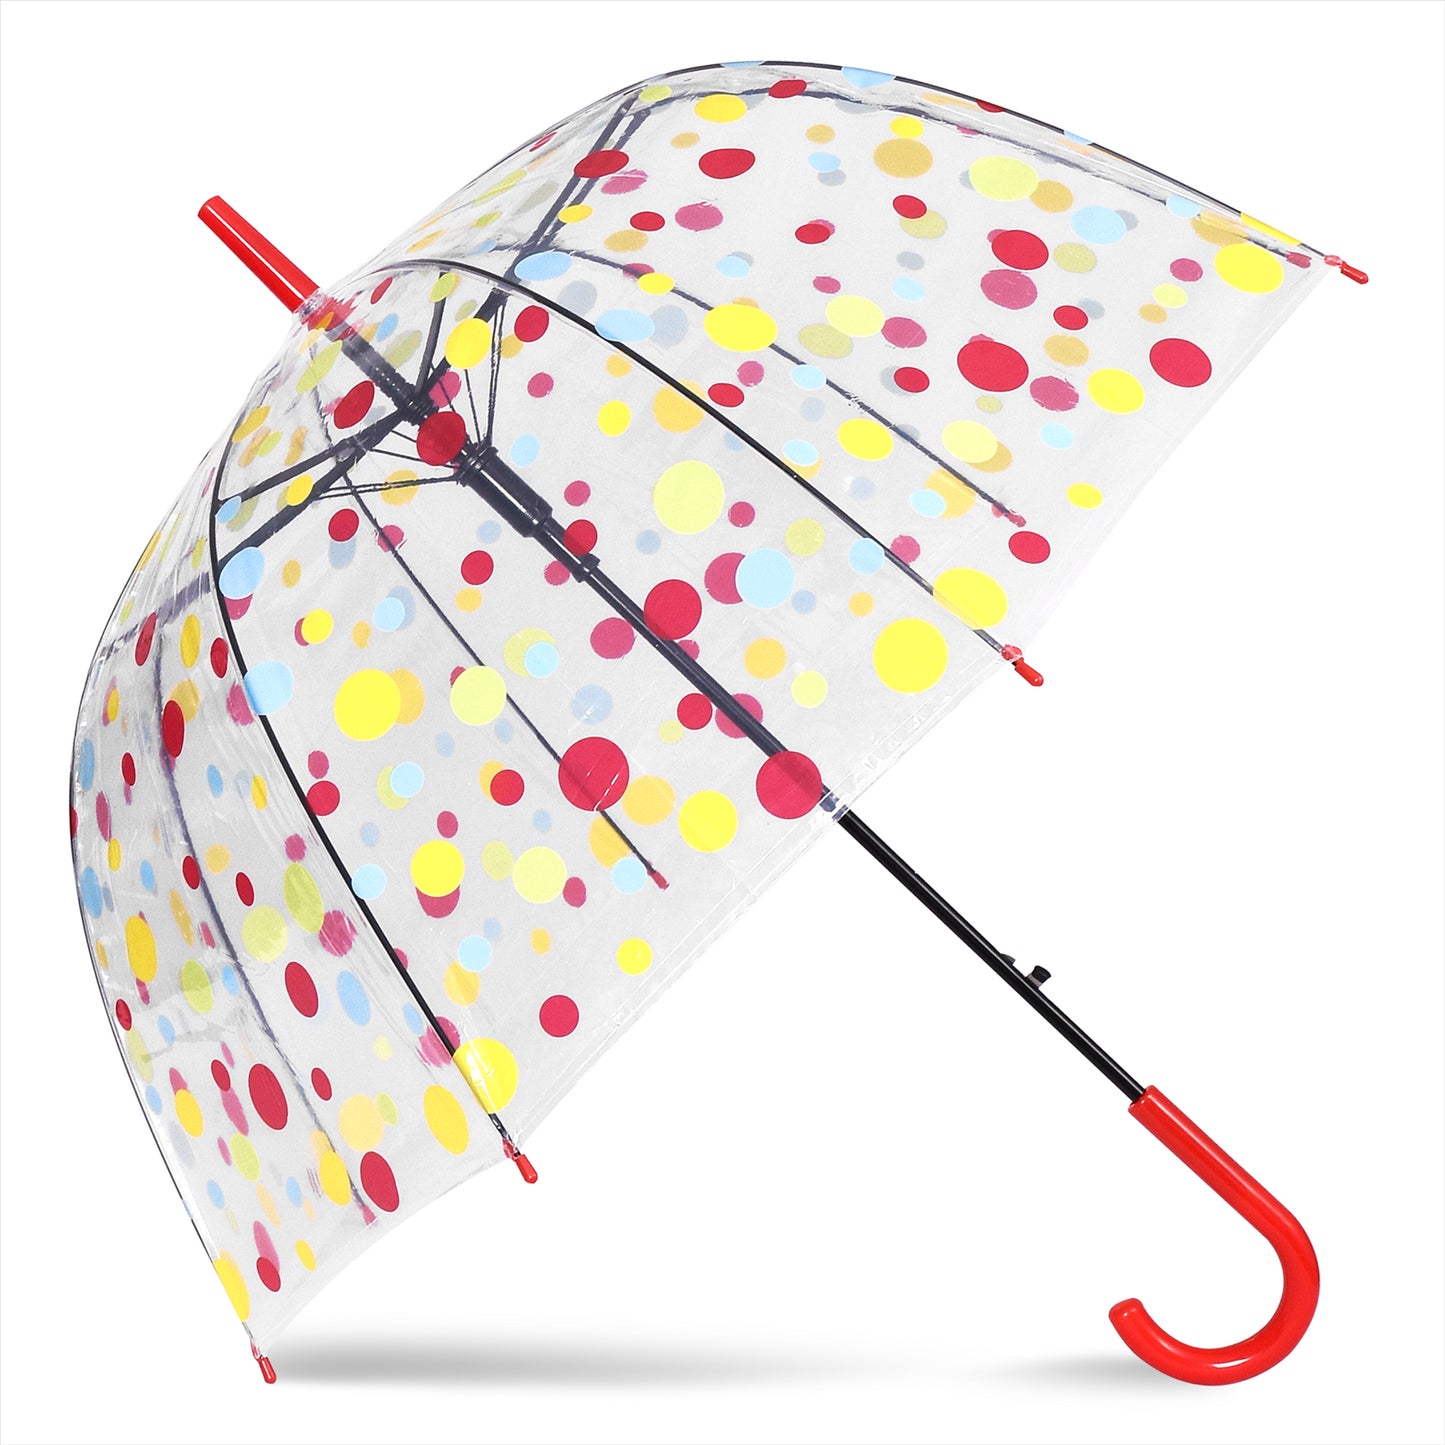 See Clearly in the Rain with a Transparent Dome Umbrella